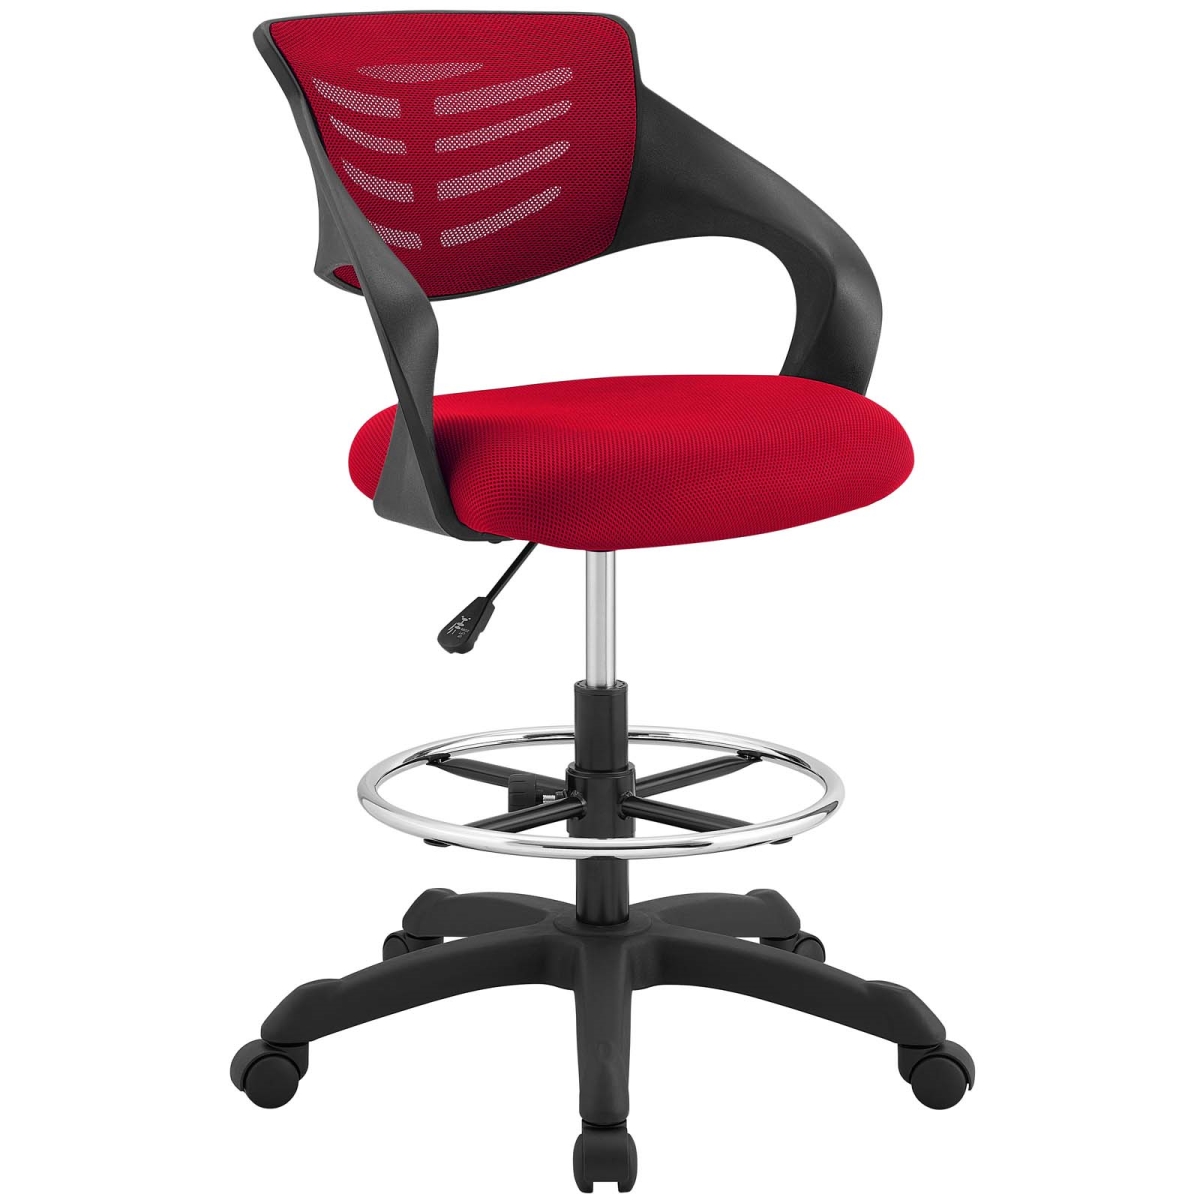 Eei-3040-red Thrive Mesh Drafting Chair - Red, 35 - 43 X 25 X 24.5 In.